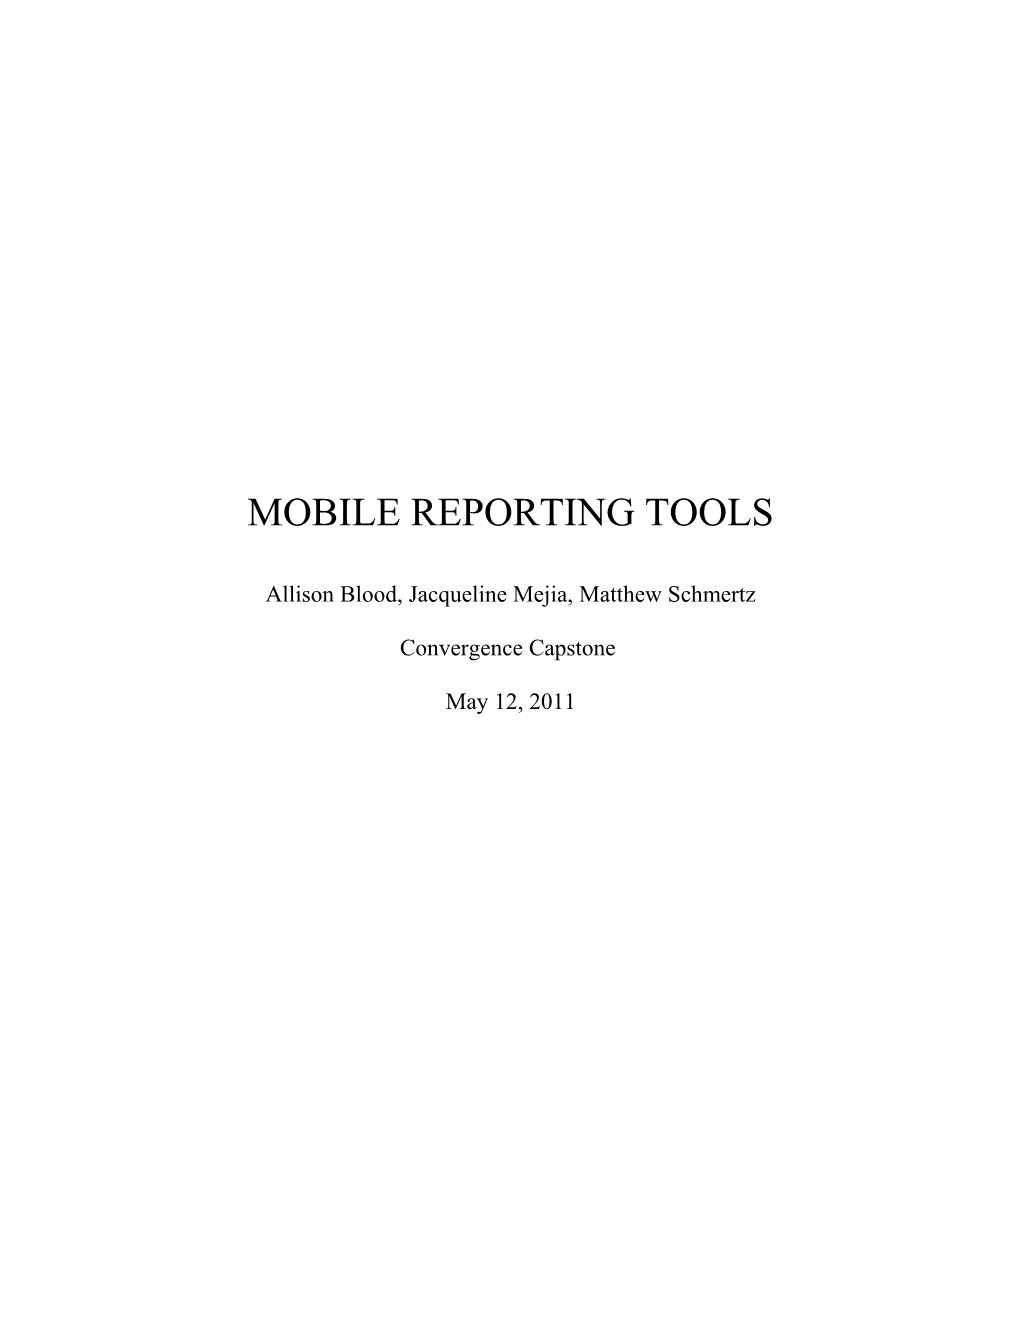 What Is a Mobile Reporting Tool